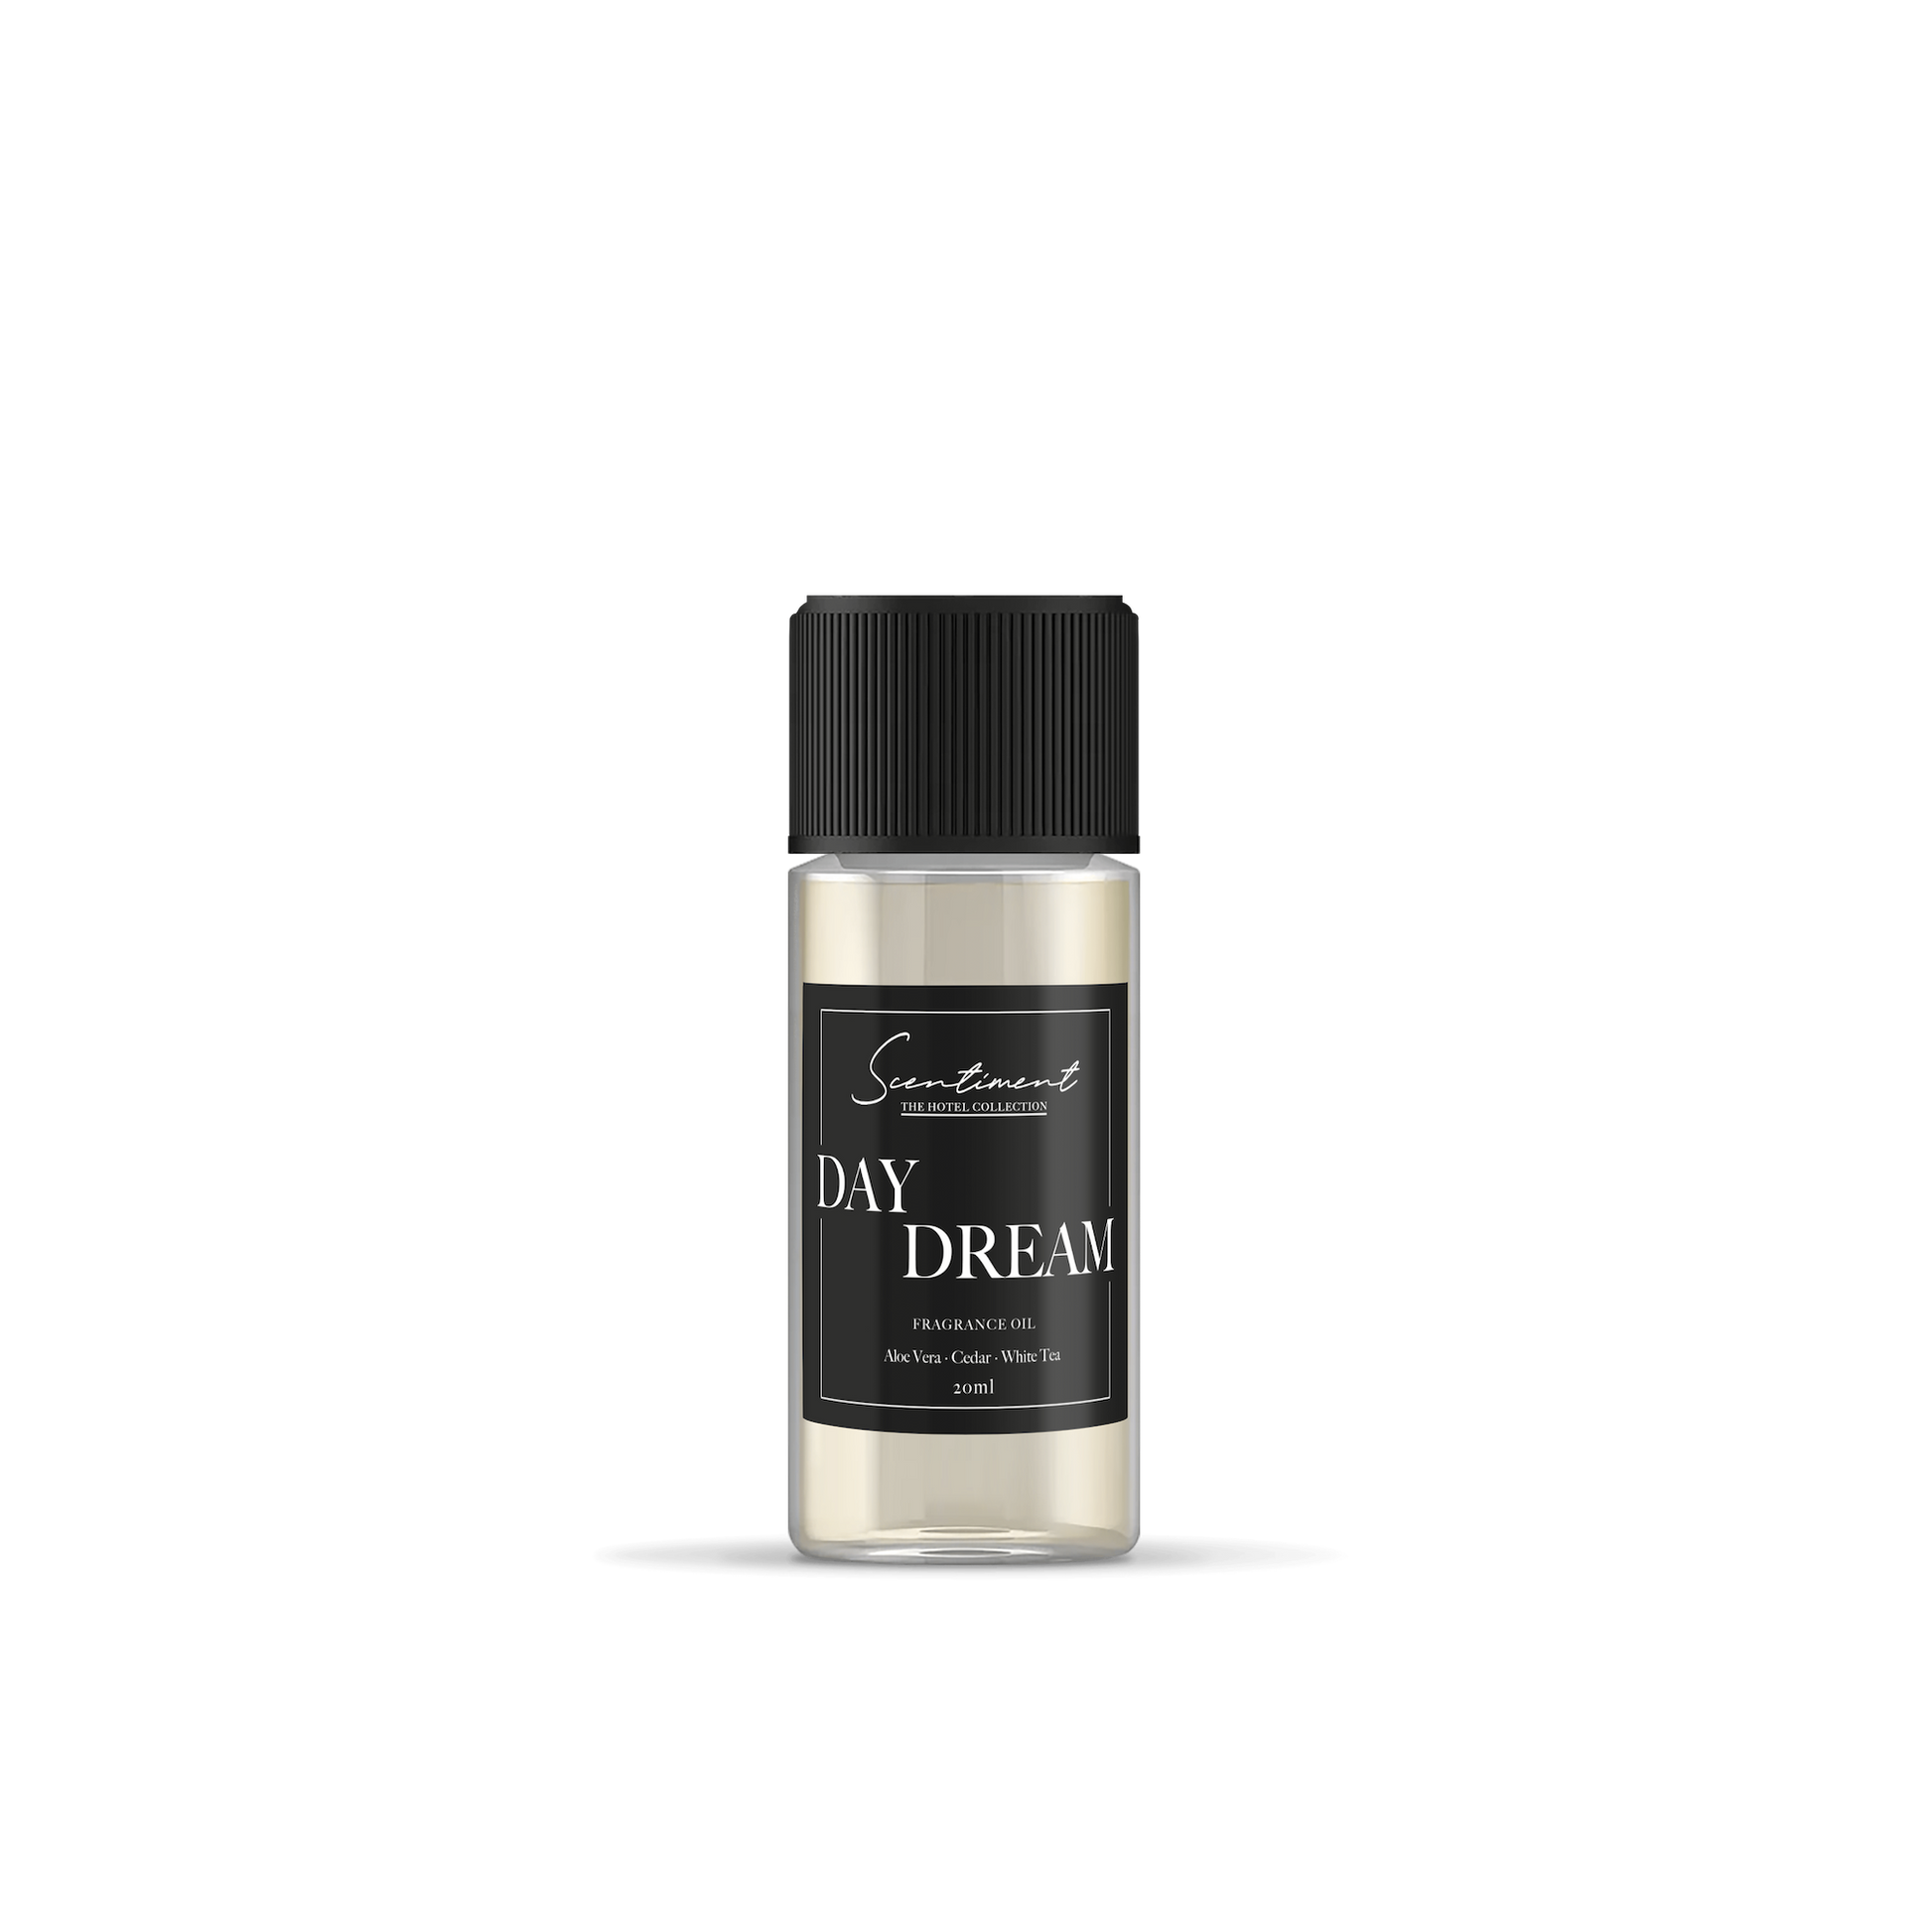 Day Dream Fragrance Oil, inspired by Westin® Hotels, with notes of Aloe Vera, Cedar, and White Tea.